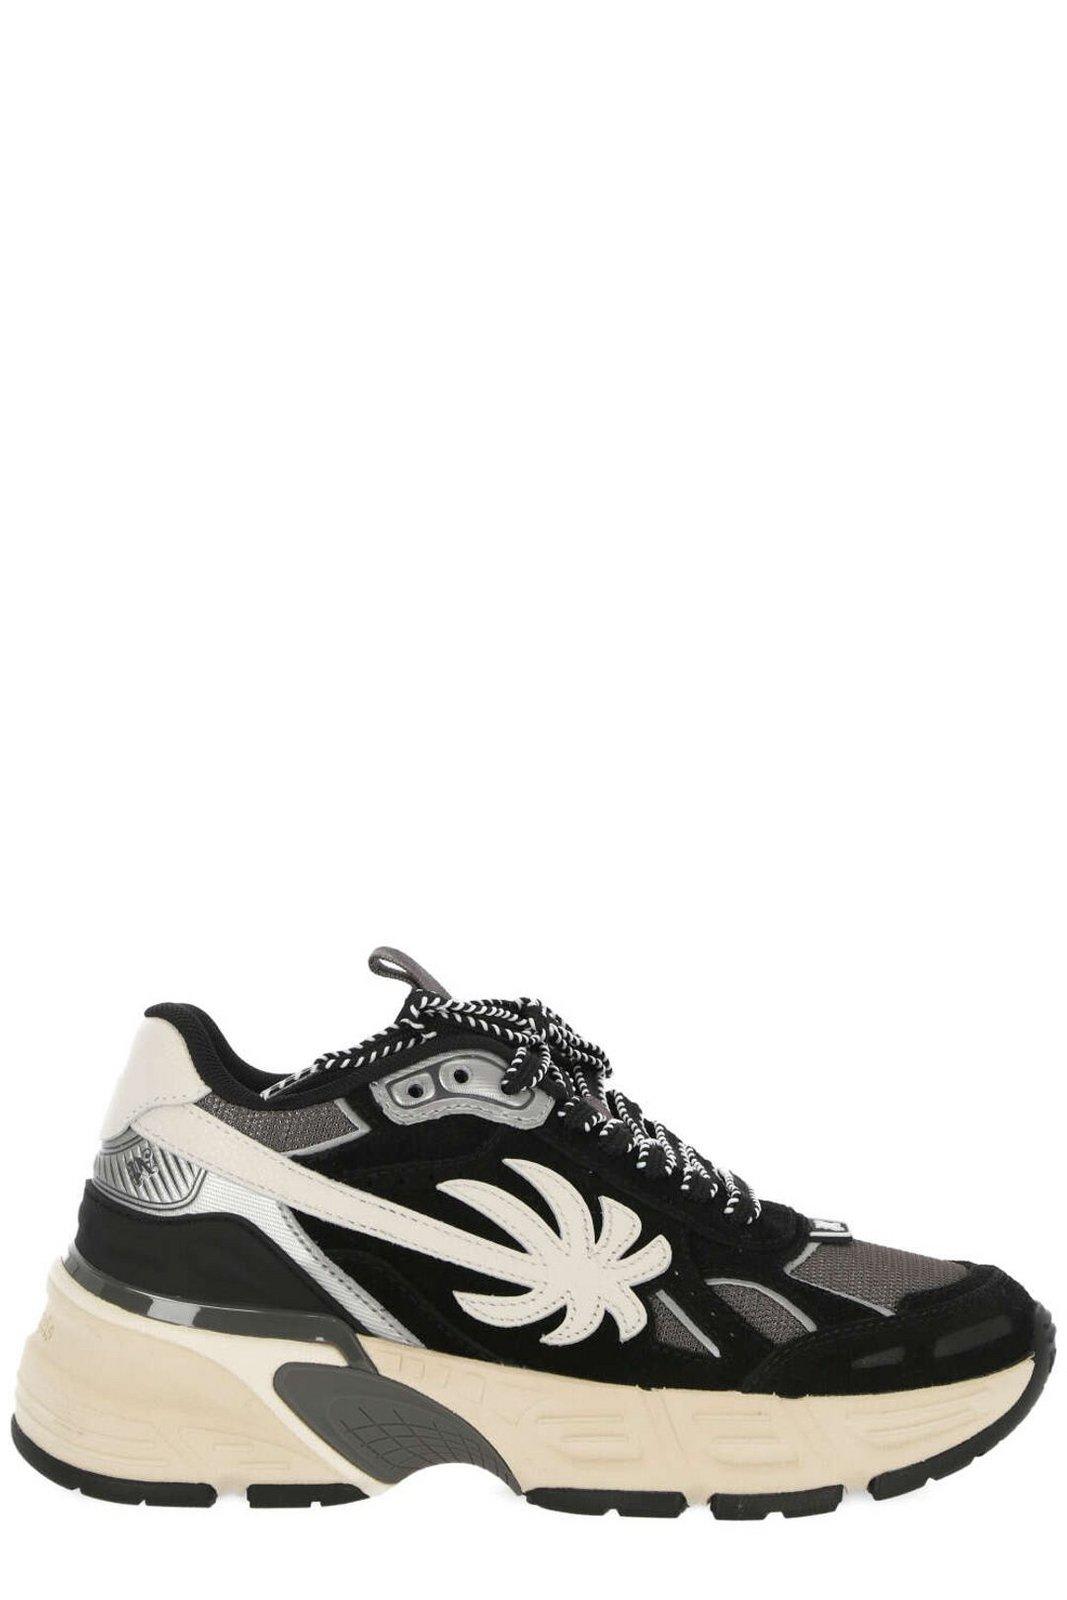 PALM ANGELS PALM PATCH SNEAKERS